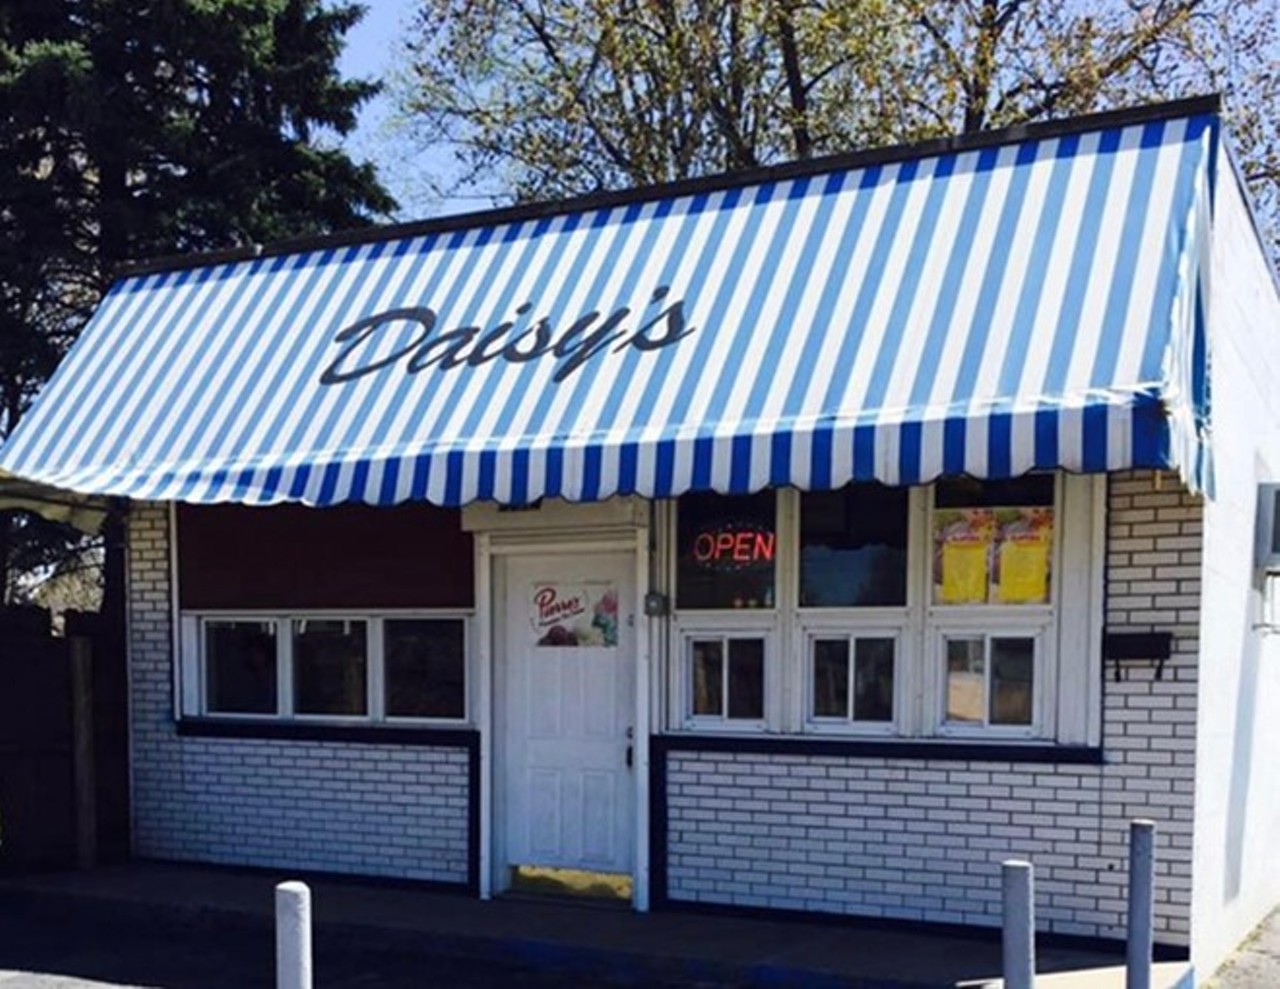  Daisy’s
5614 Fleet Ave., Cleveland
Daisy’s in Slavic Village has endured its share of ups and downs over the past few years.The 40-year-old ice cream shop closed in 2018 and sat idle for three years. In 2018, chef Walter Hyde revived the shop but passed away in 2021.This past fall, LT Magnotto of Guardian Cold Brew purchased the property for his growing cold-brew coffee business,, using the back for production. Partners Brittany Bissell and Chris Hoke hope to reopen Daisy’s by Memorial Day at the latest. Their plan is to offer a combination of hard pack and soft serve ice creams, brownie sundaes, banana splits, milkshakes and floats. They will be serving Toft’s ice cream from Sandusky, “Ohio’s oldest dairy.” The owners will also offer a small selection of hot foods starring hot dogs and traditional Polish boys, with kielbasa, fries, coleslaw and barbecue sauce.